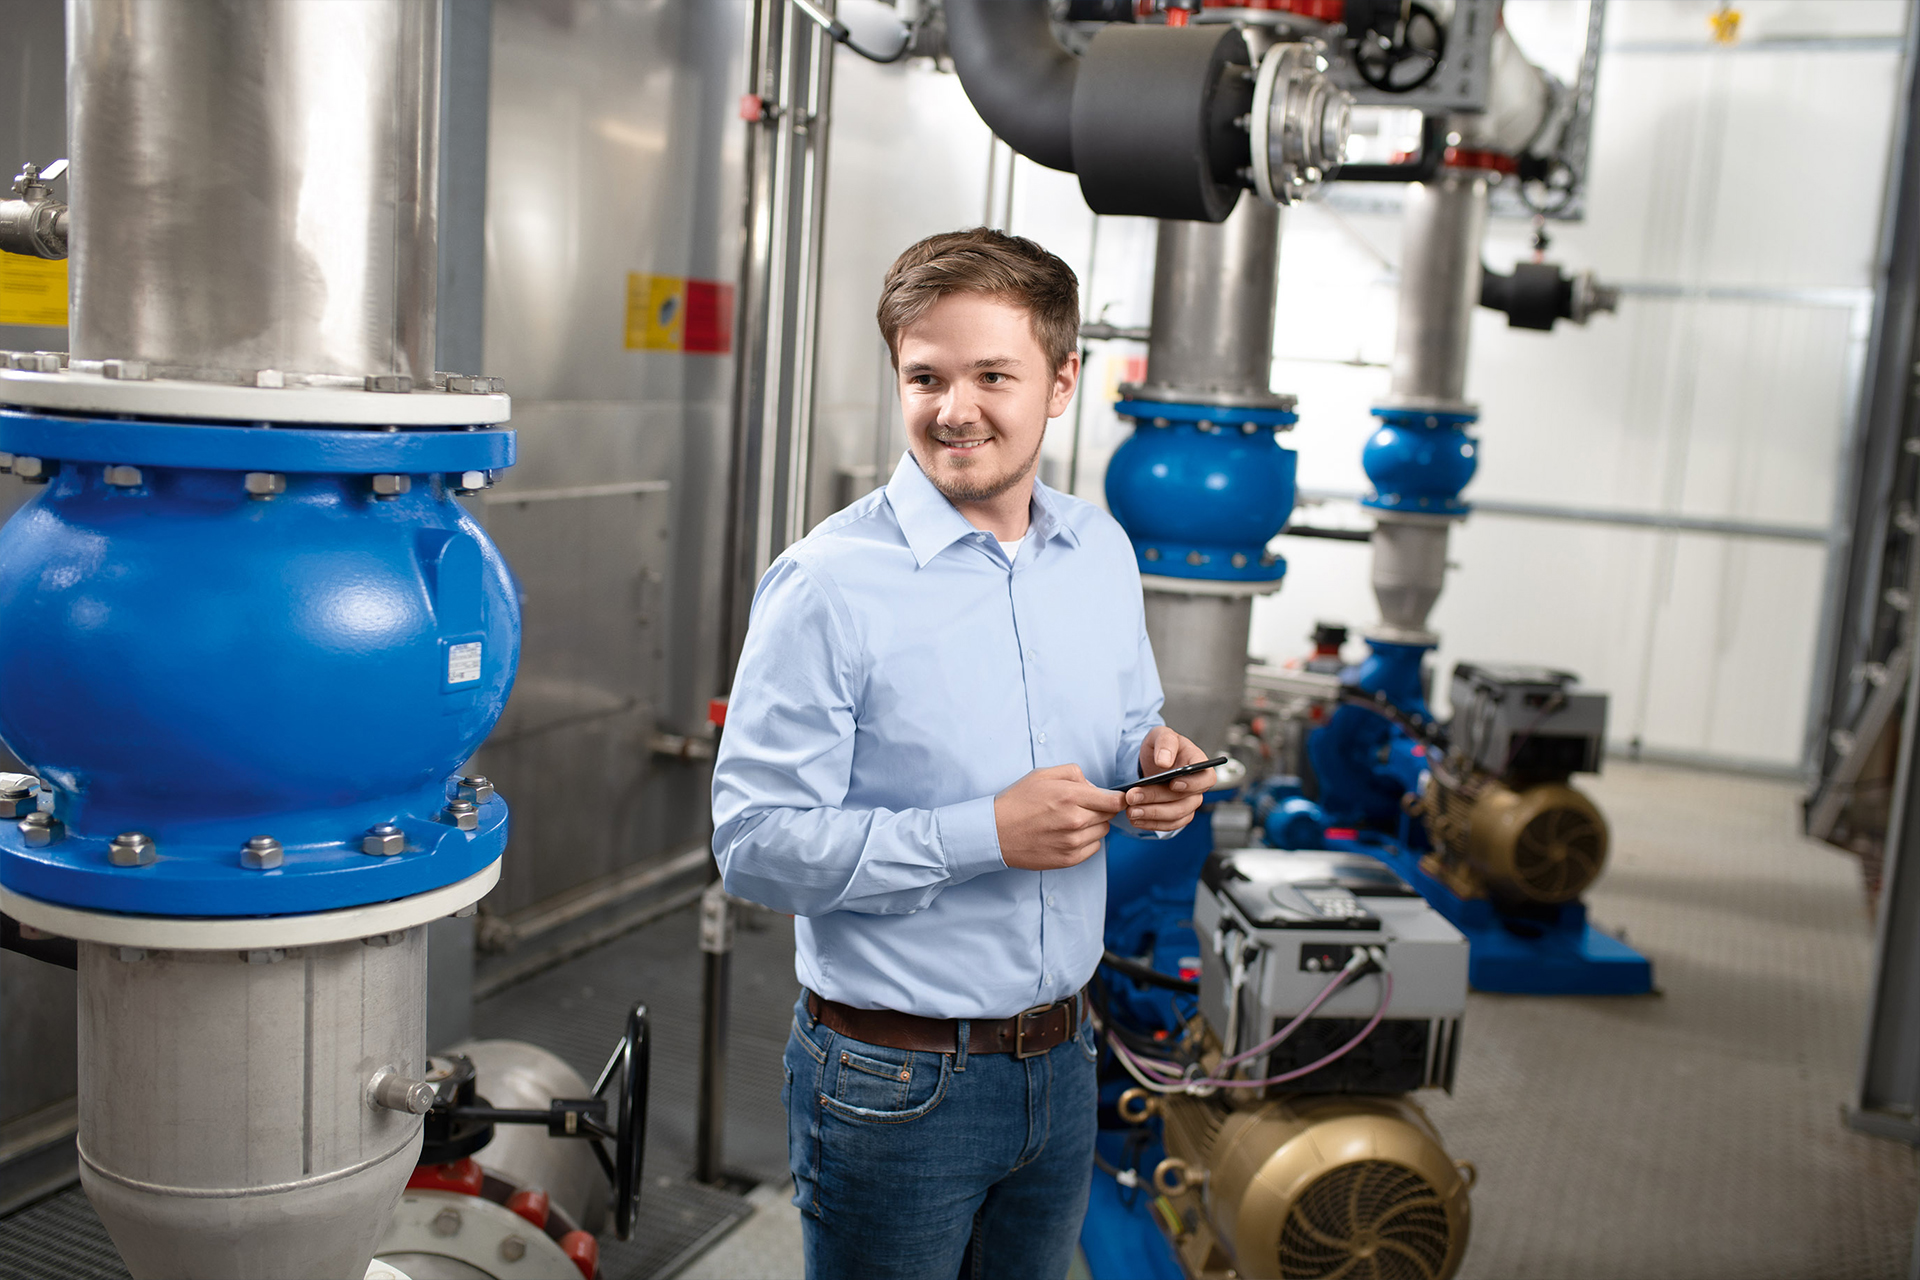 A system operator standing next to his pumps with a smartphone